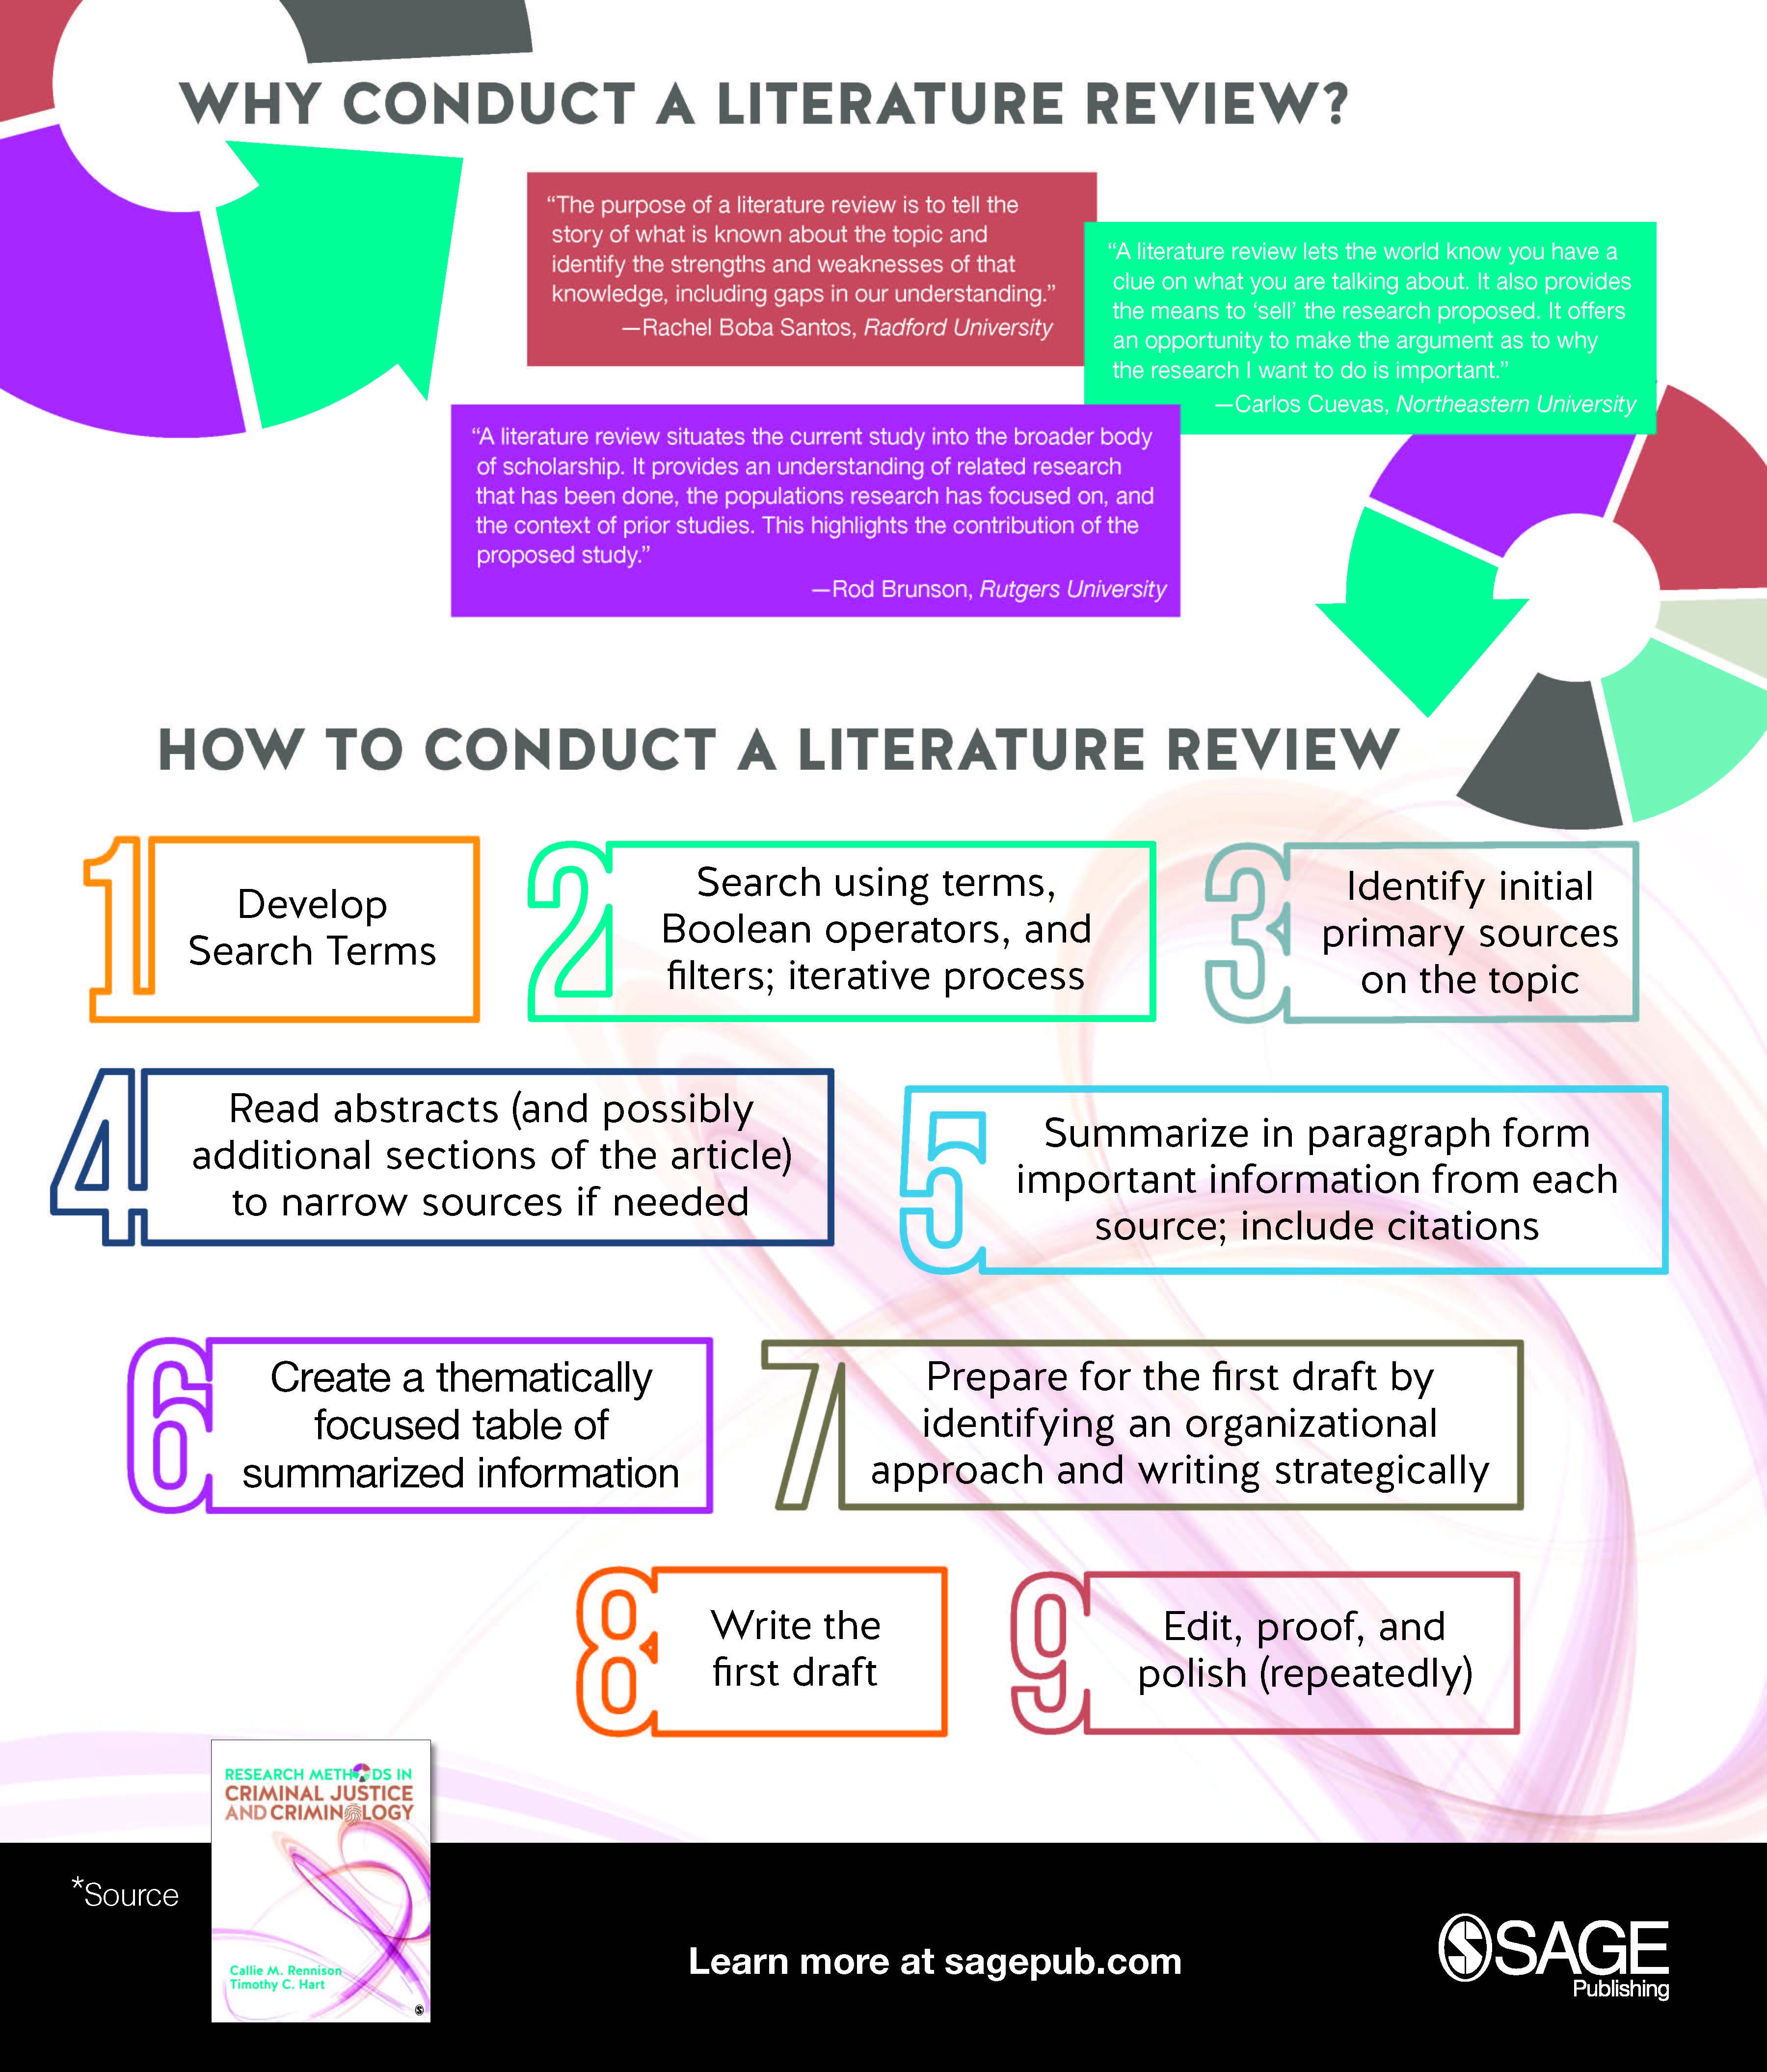 skills needed to conduct a literature review